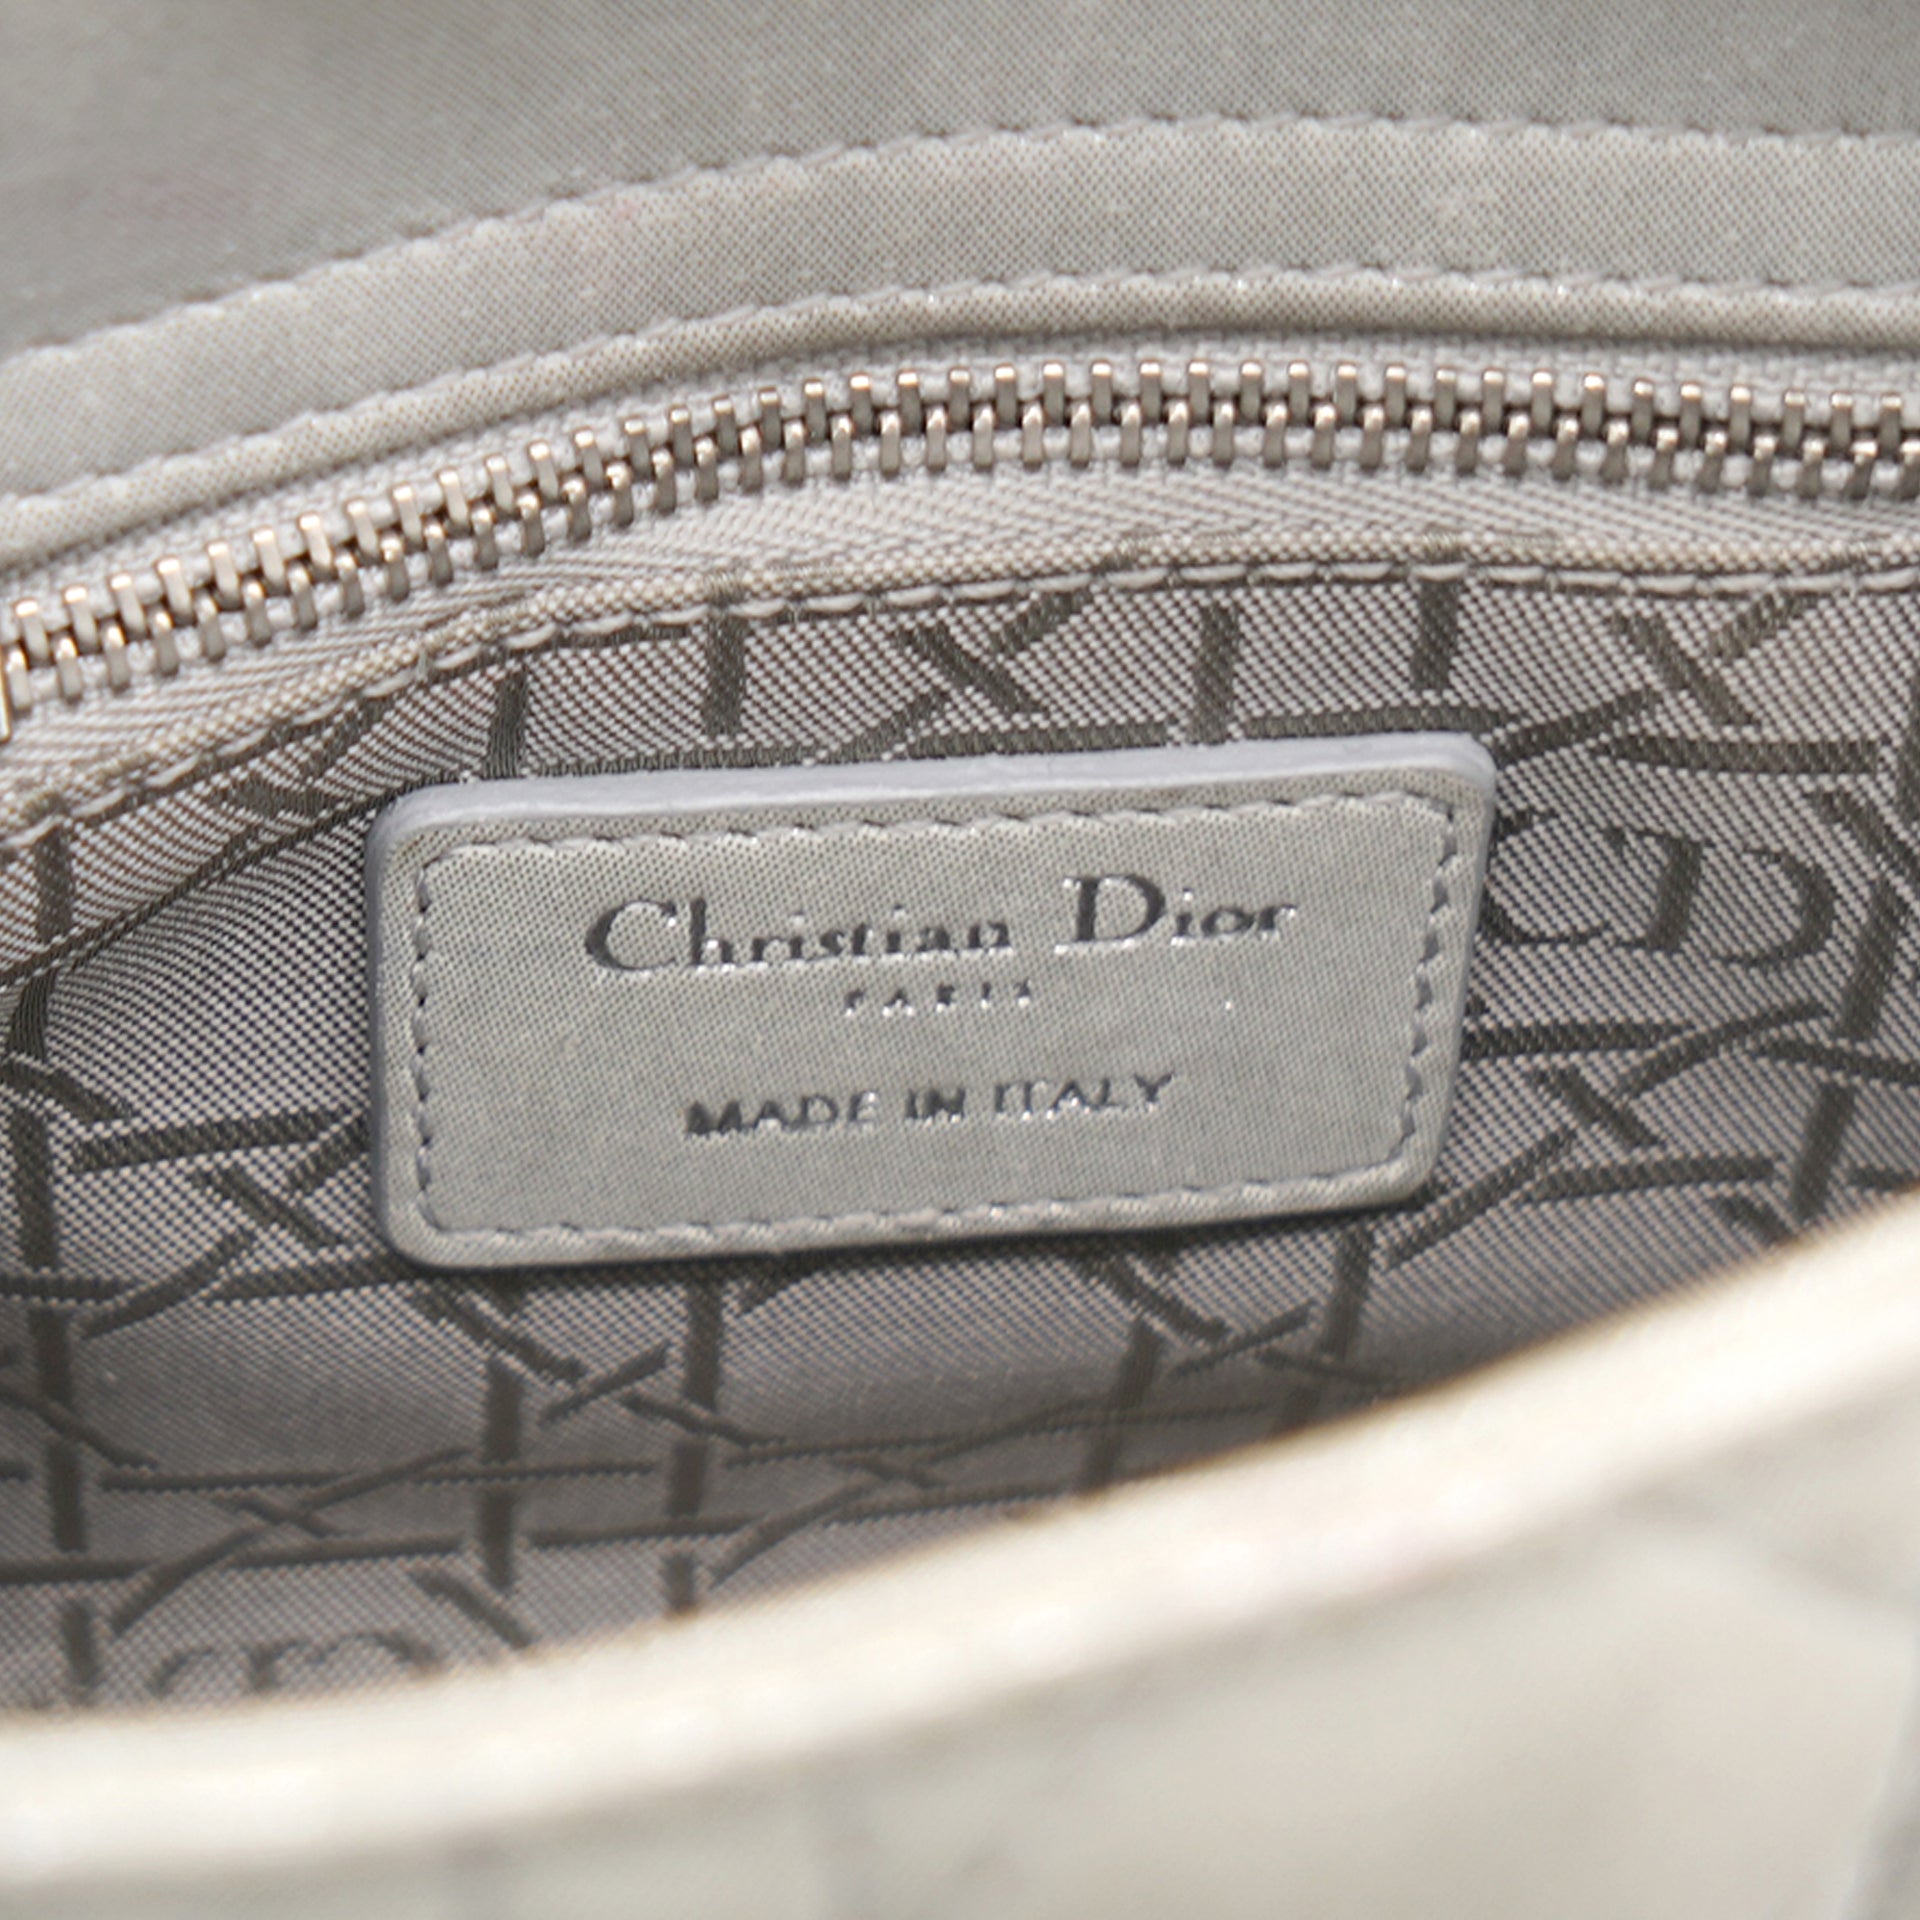 Grey Shimmering Leather Mini Lady Dior Tote